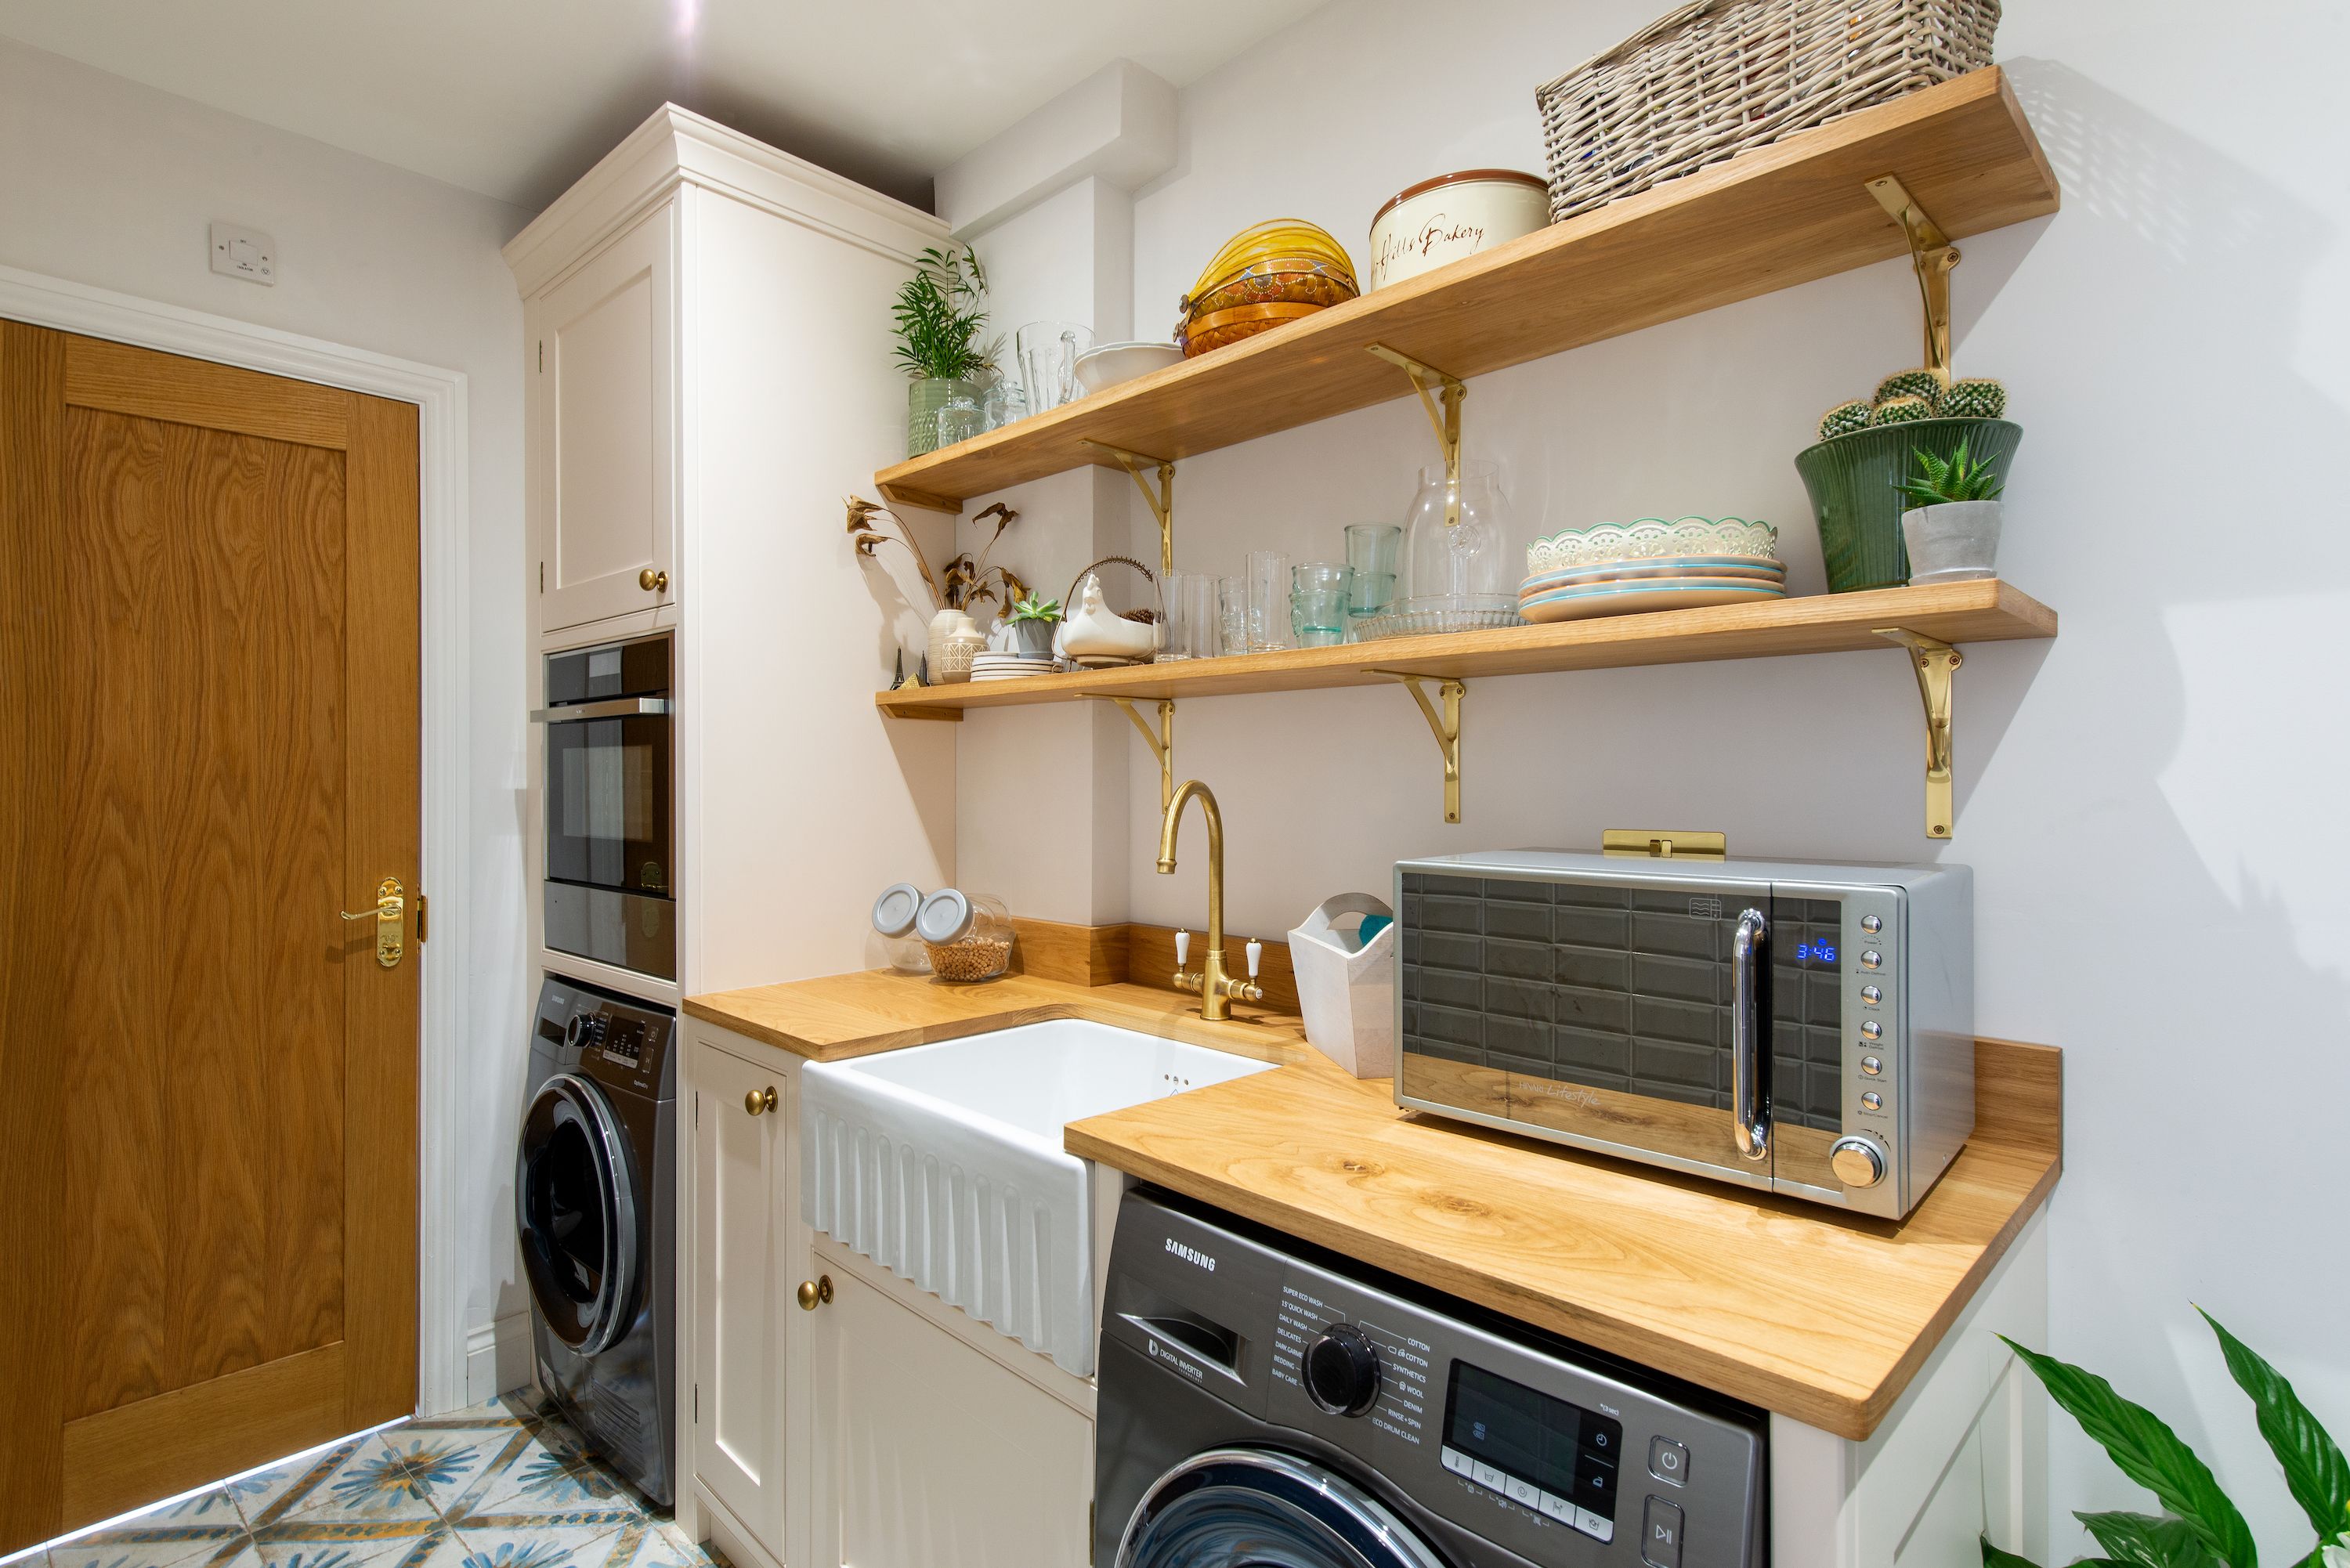 Utility room design ideas to make the most of your space